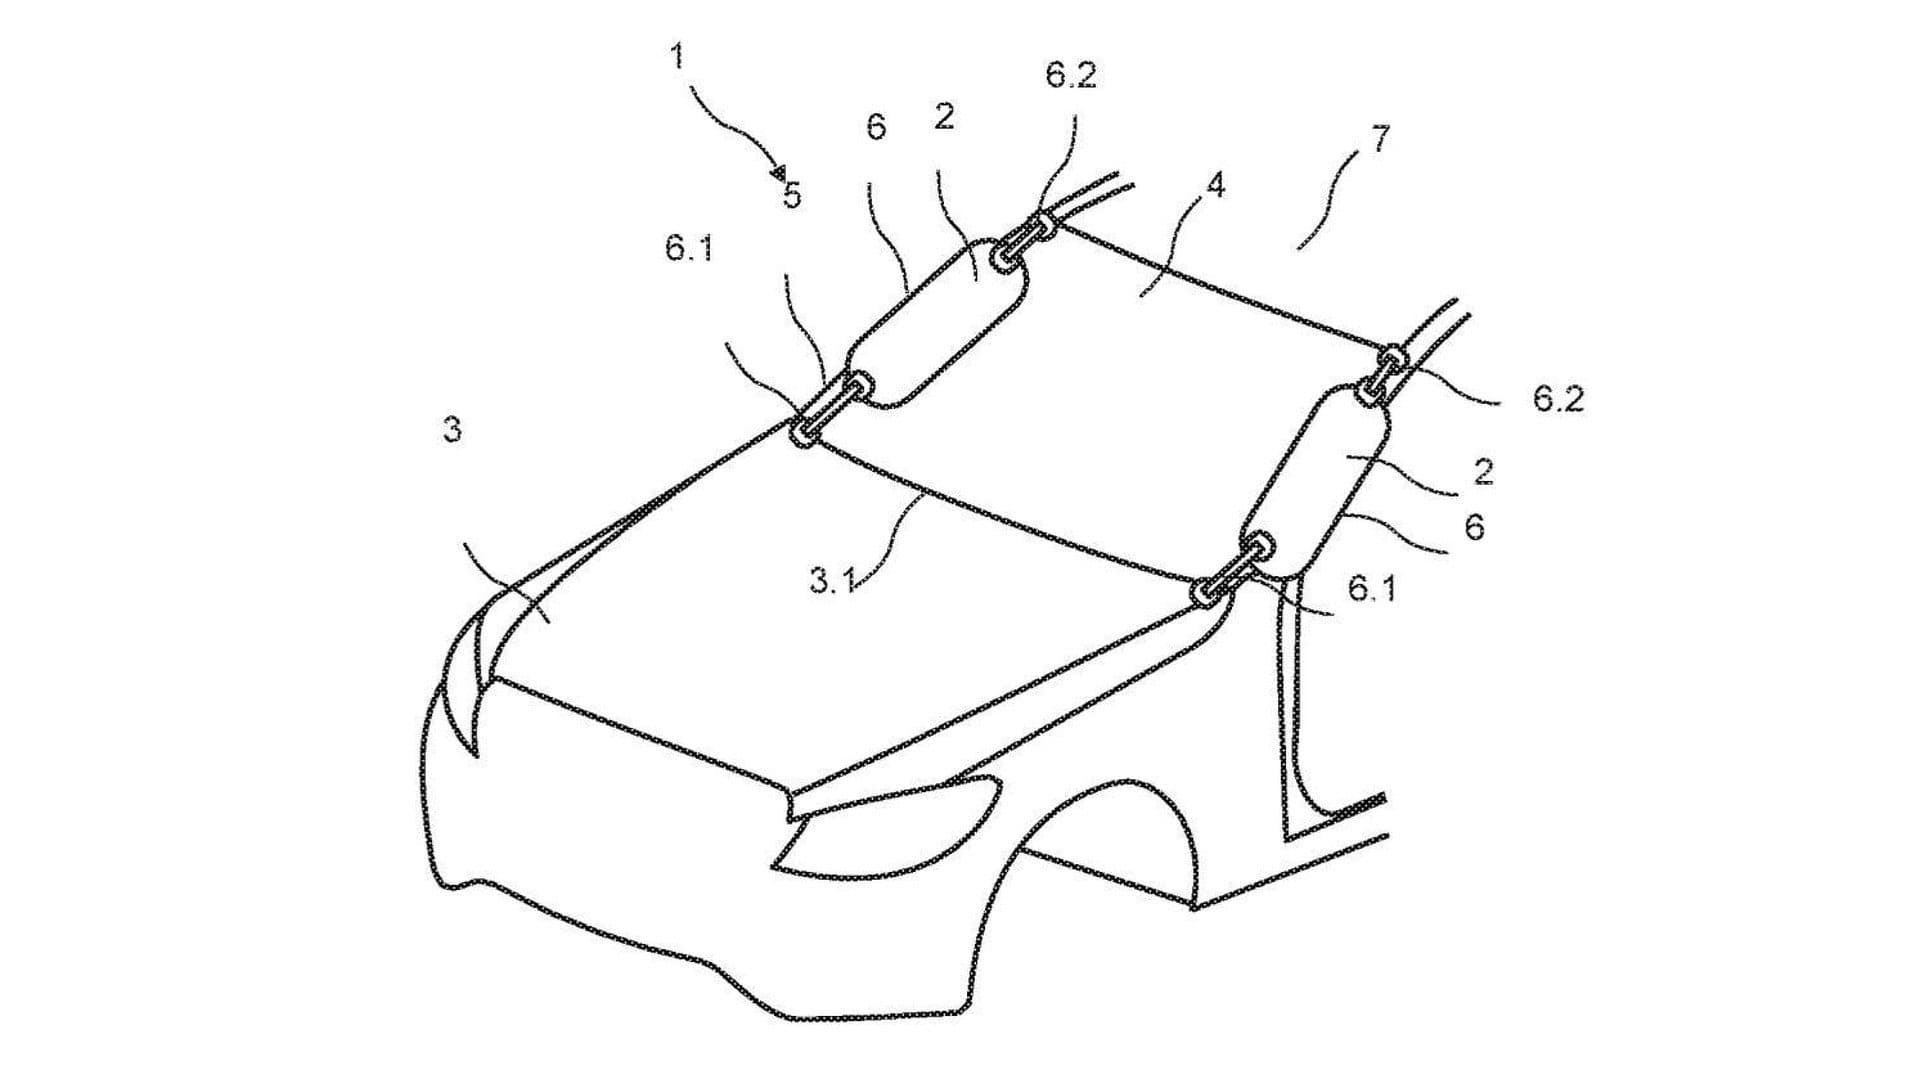 Mercedes-Benz Patents External Airbags to Help Save Pedestrians Hit by Cars